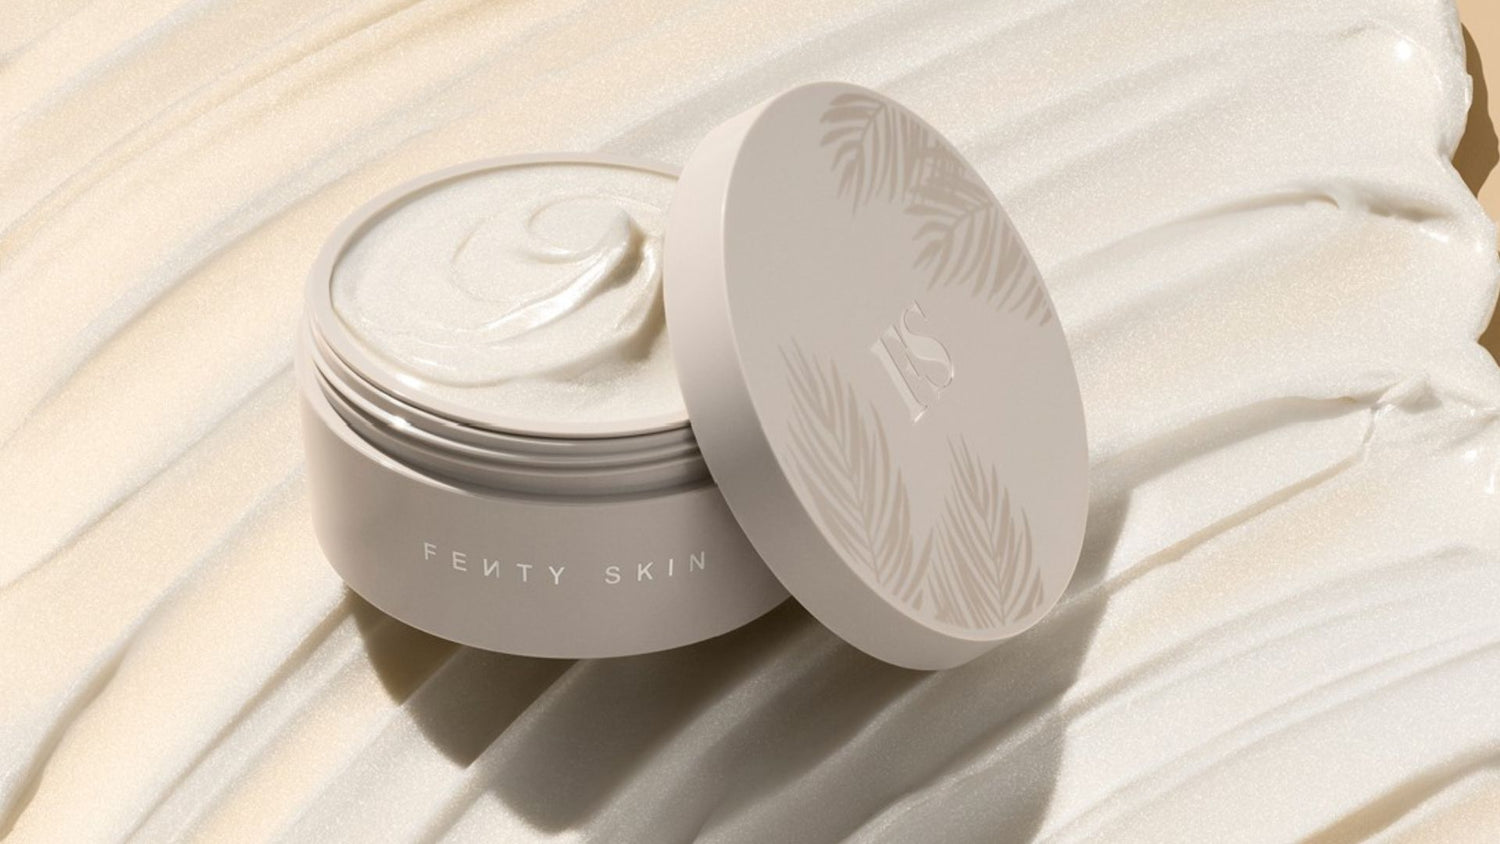 review, photos, ingredients, trends, skin care, 2022, 2023, fenty skin, butta drop shimmering whipped oil body cream, limited edition, cinnamon scent, rihanna, fenty beauty, sephora, kohls, best new skincare products